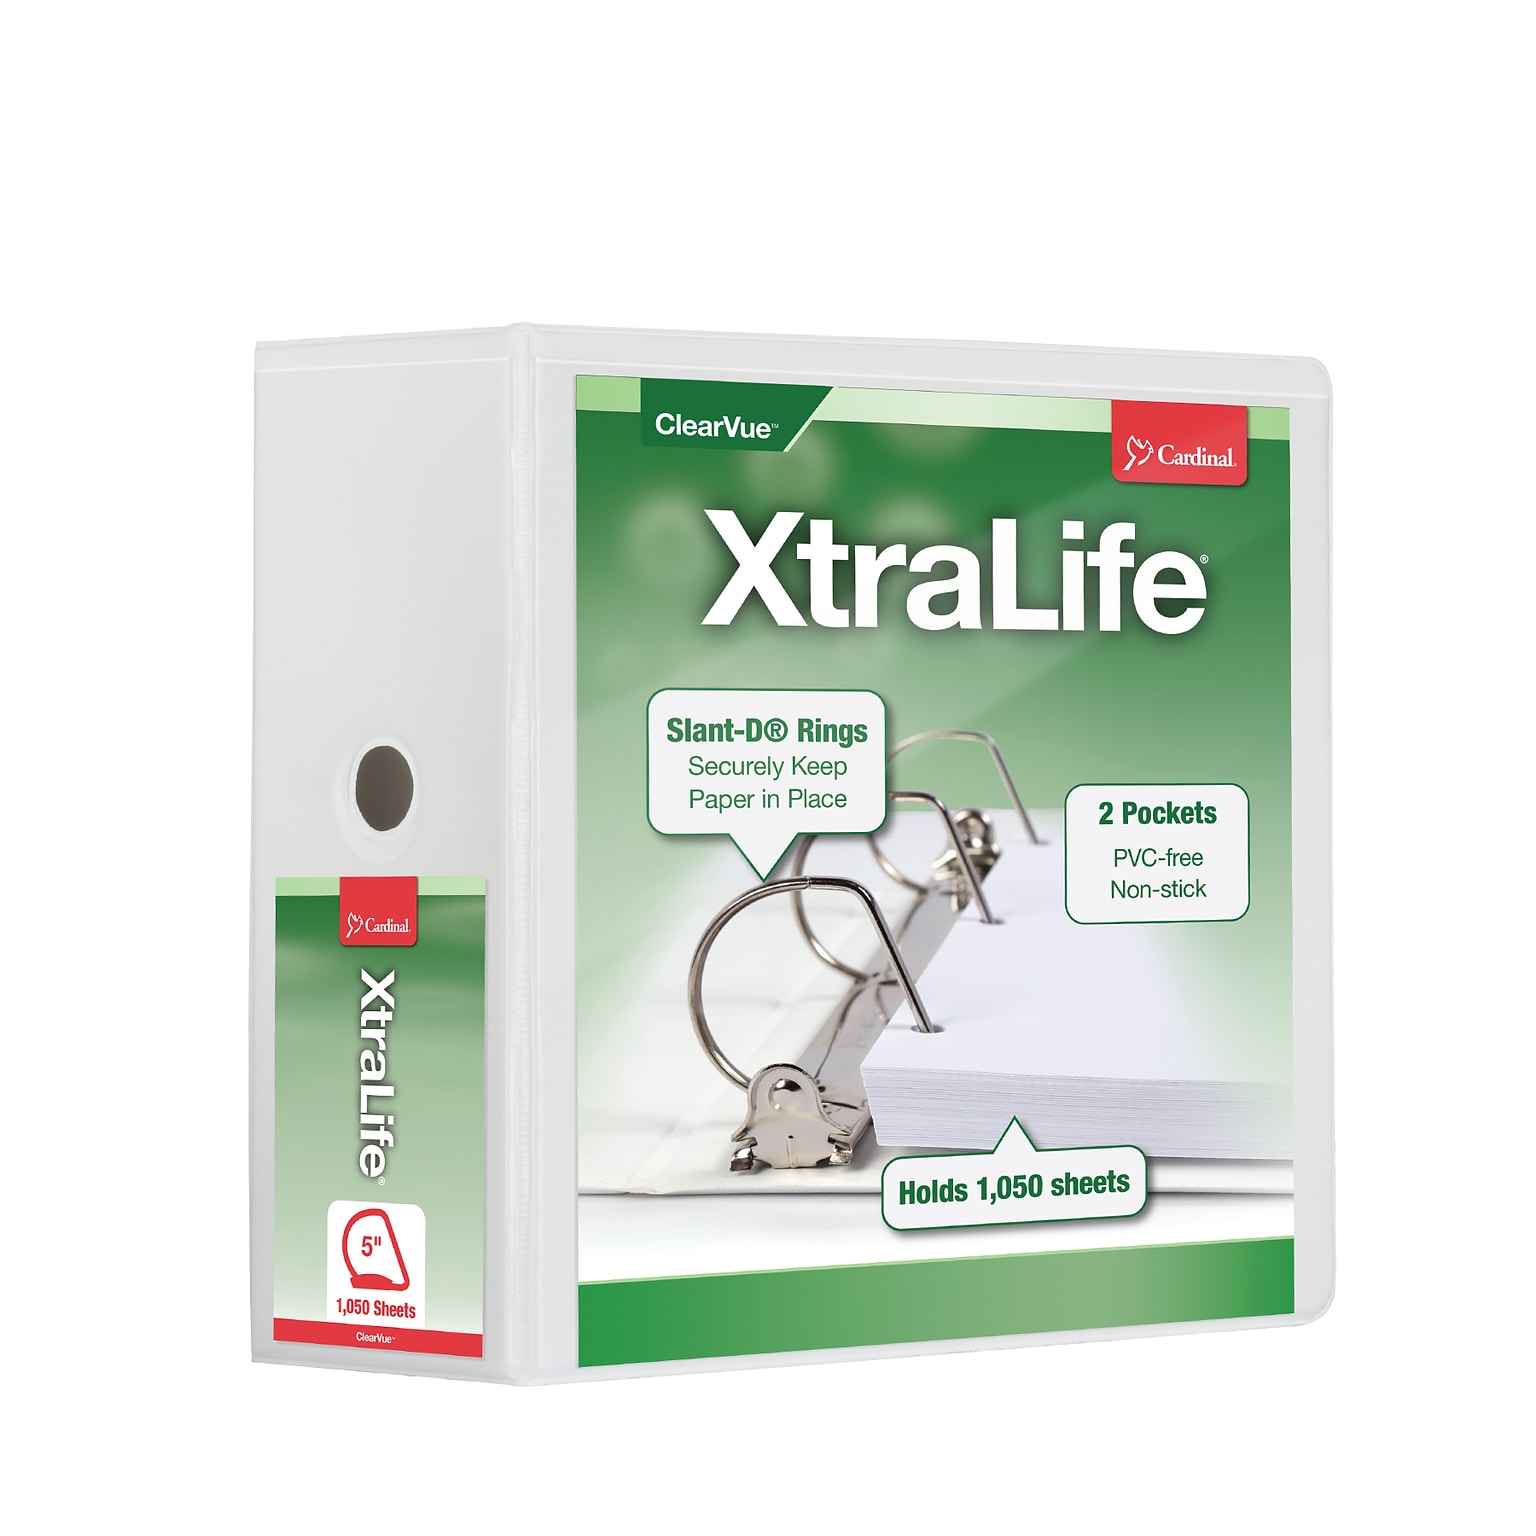 Cardinal XtraLife ClearVue Heavy Duty 5 3-Ring View Binders, D-Ring, White (26350)